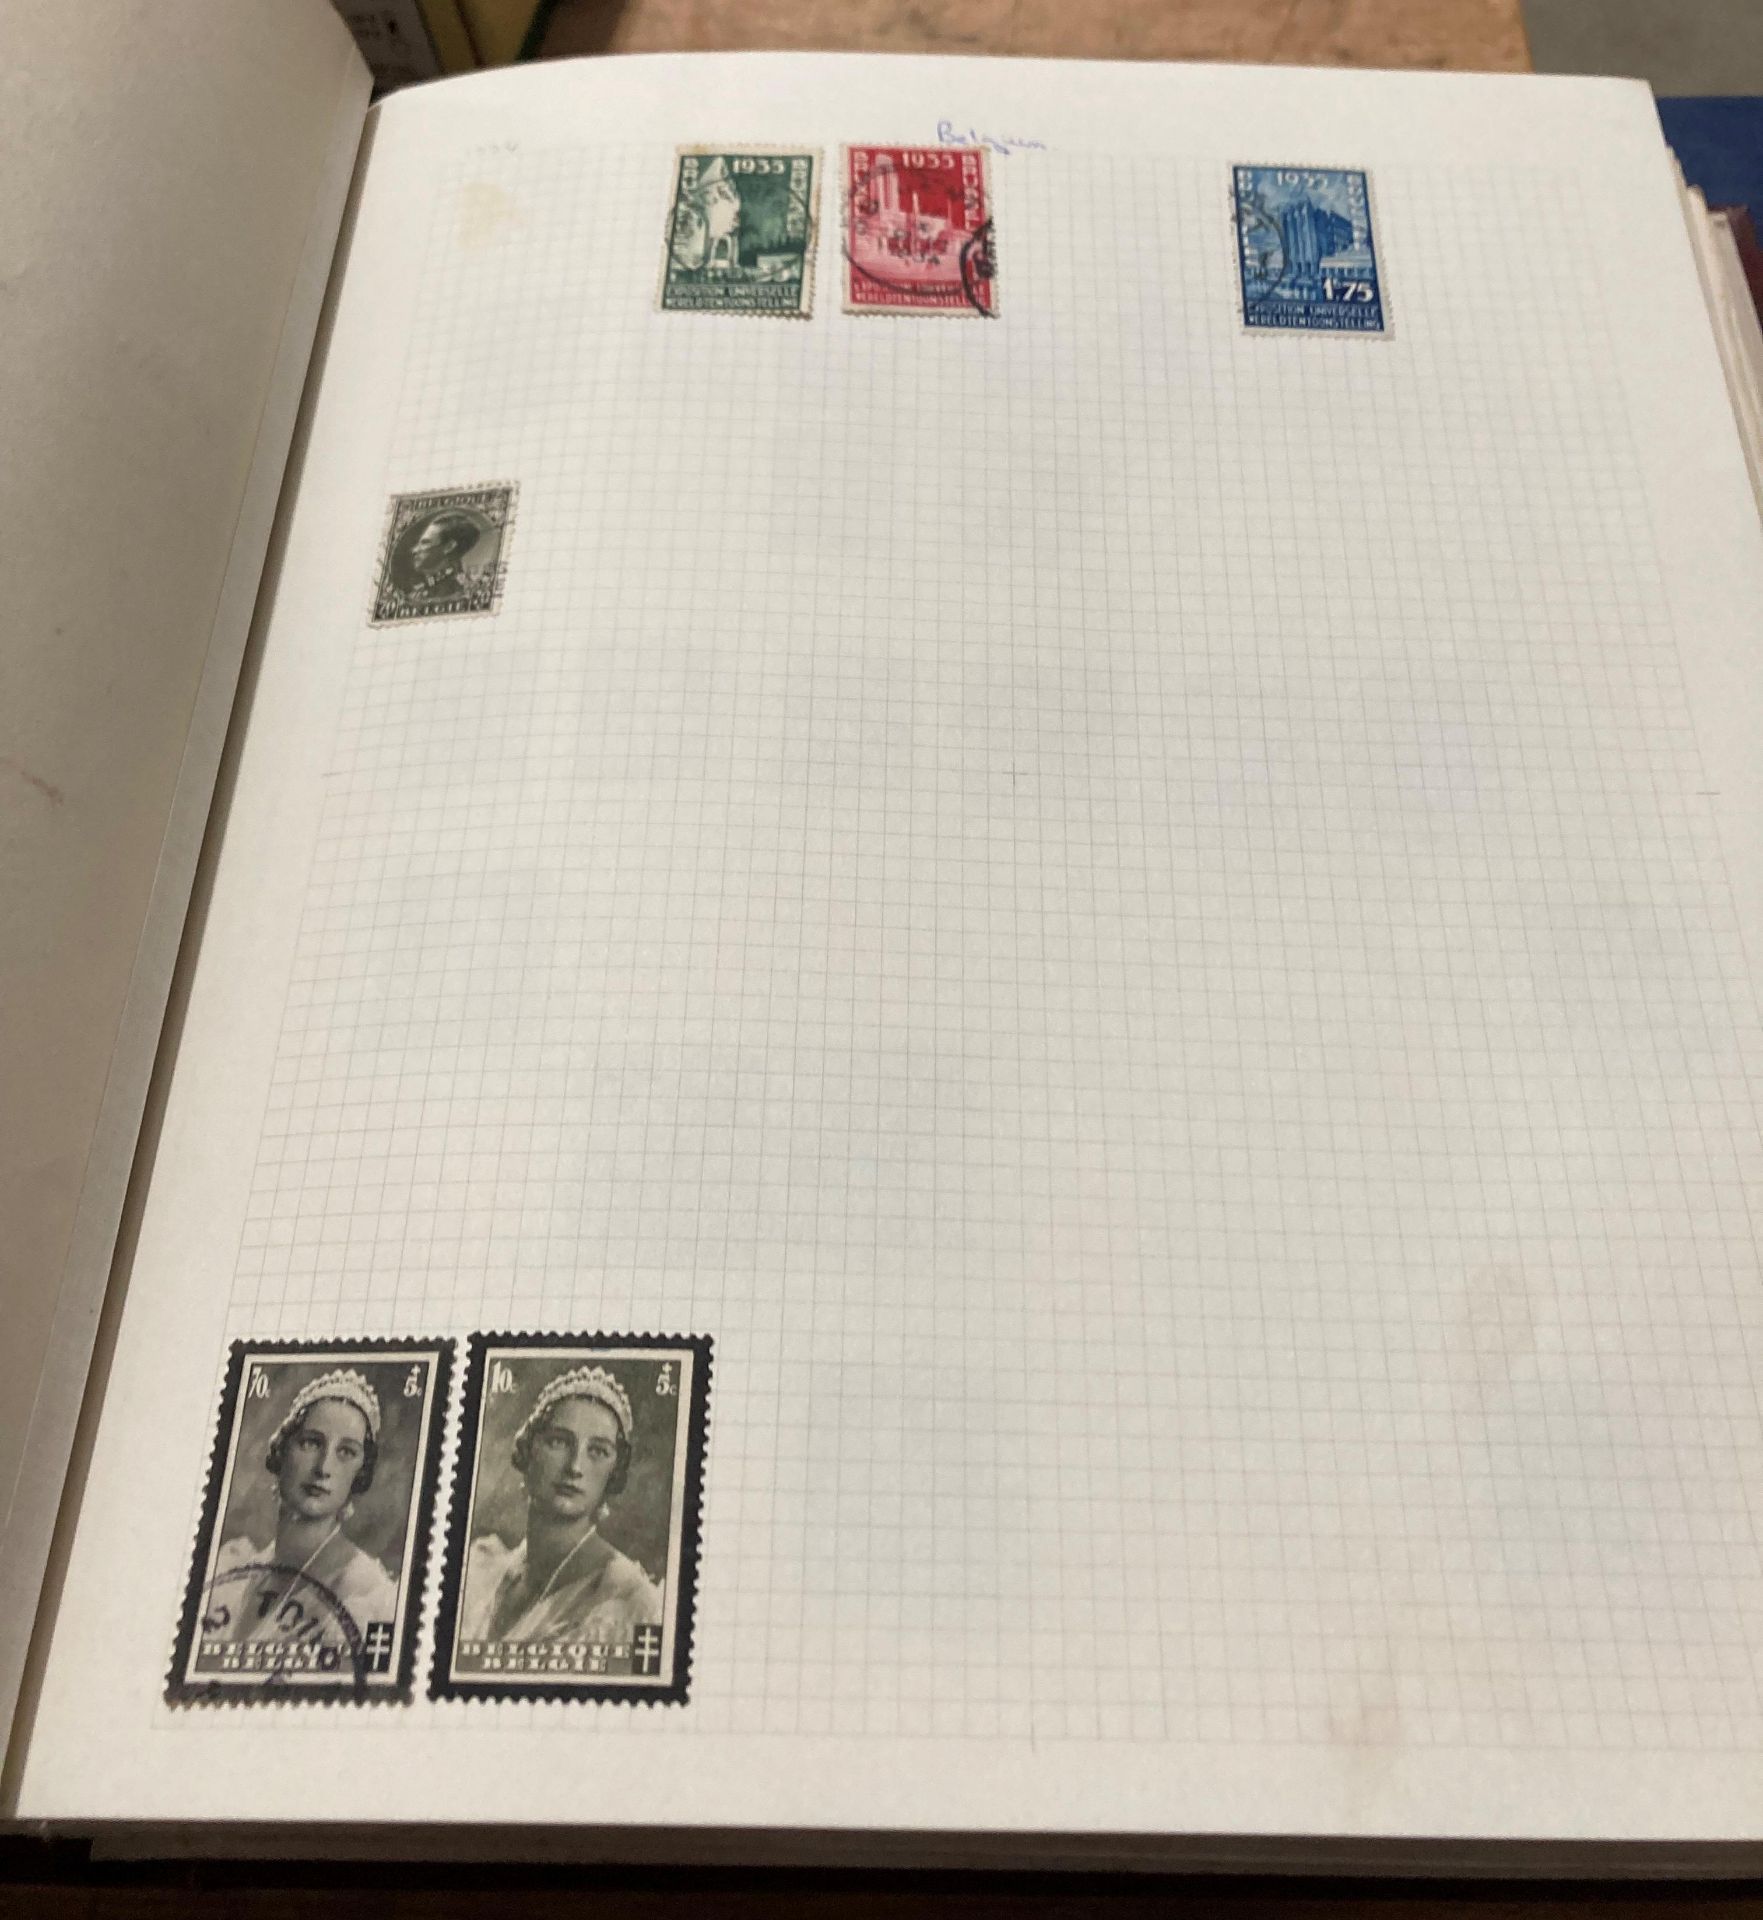 Nine stamp albums and contents - assorted World stamps (saleroom location: S2 table QB04) - Image 4 of 10